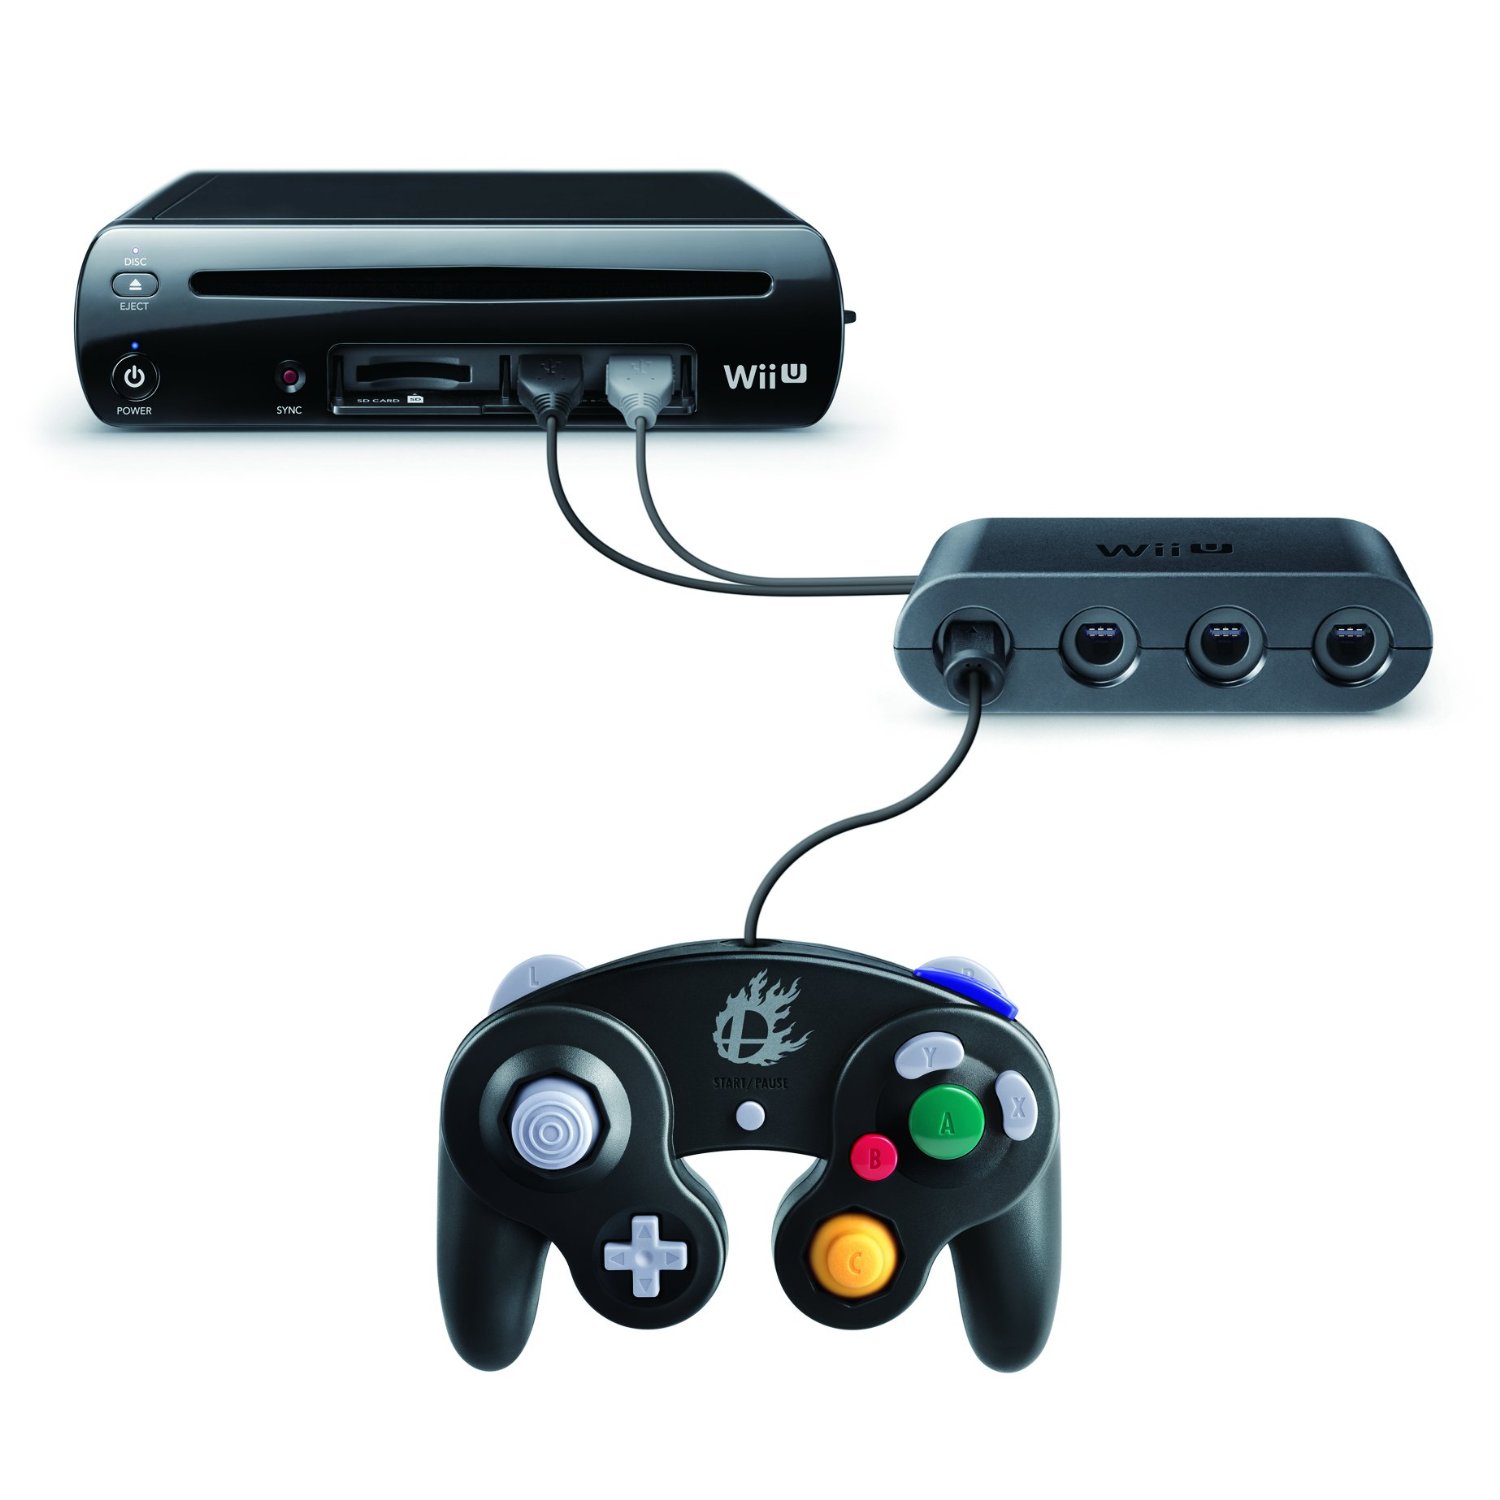 GameCube Controller Support on Wii Games - Giant Bomb